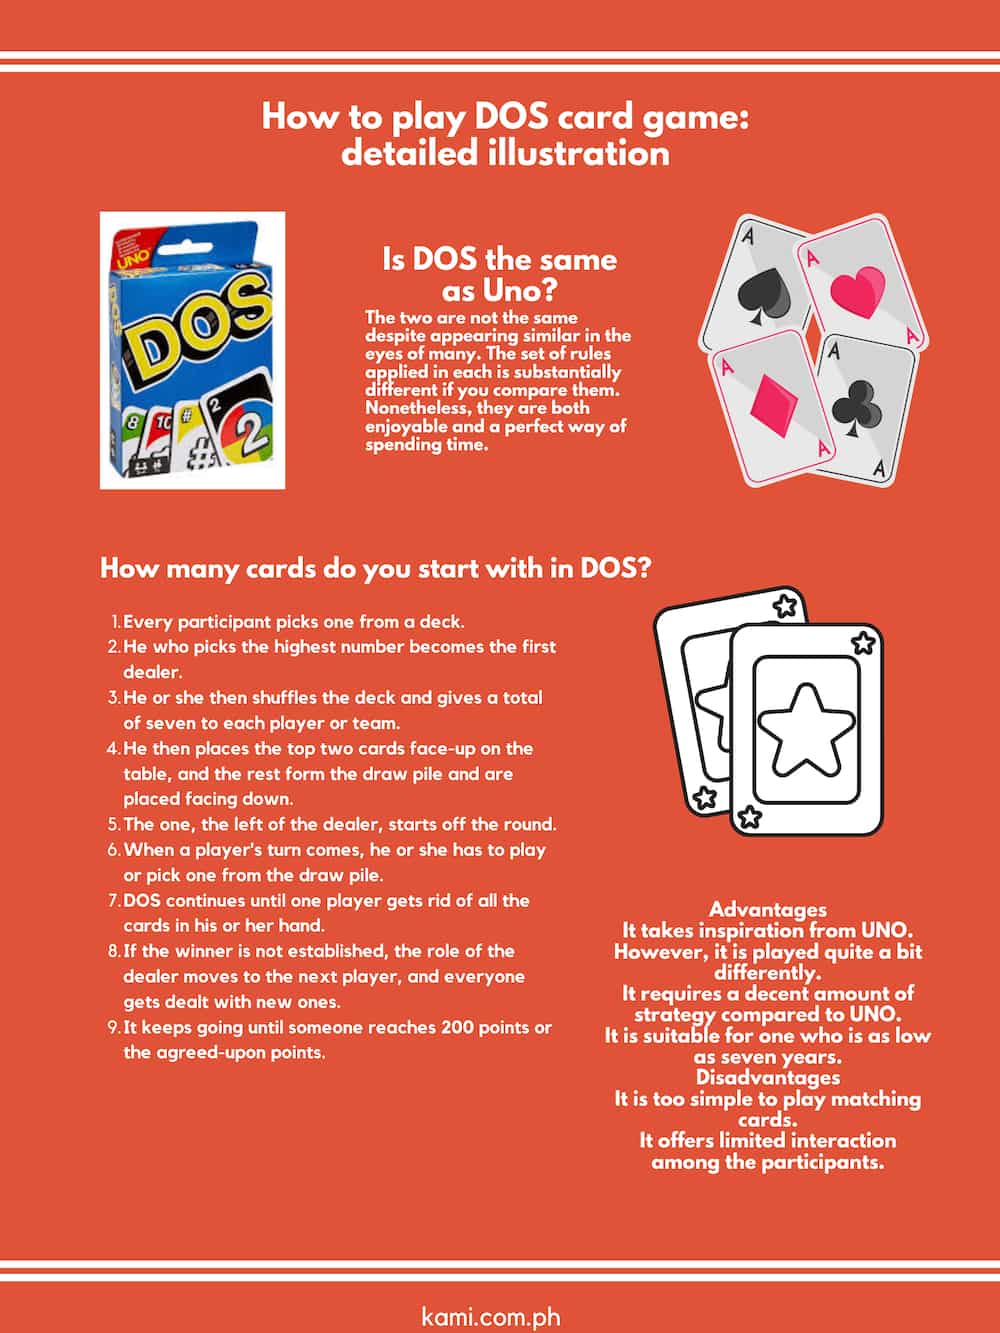 How to play DOS card game: detailed illustration